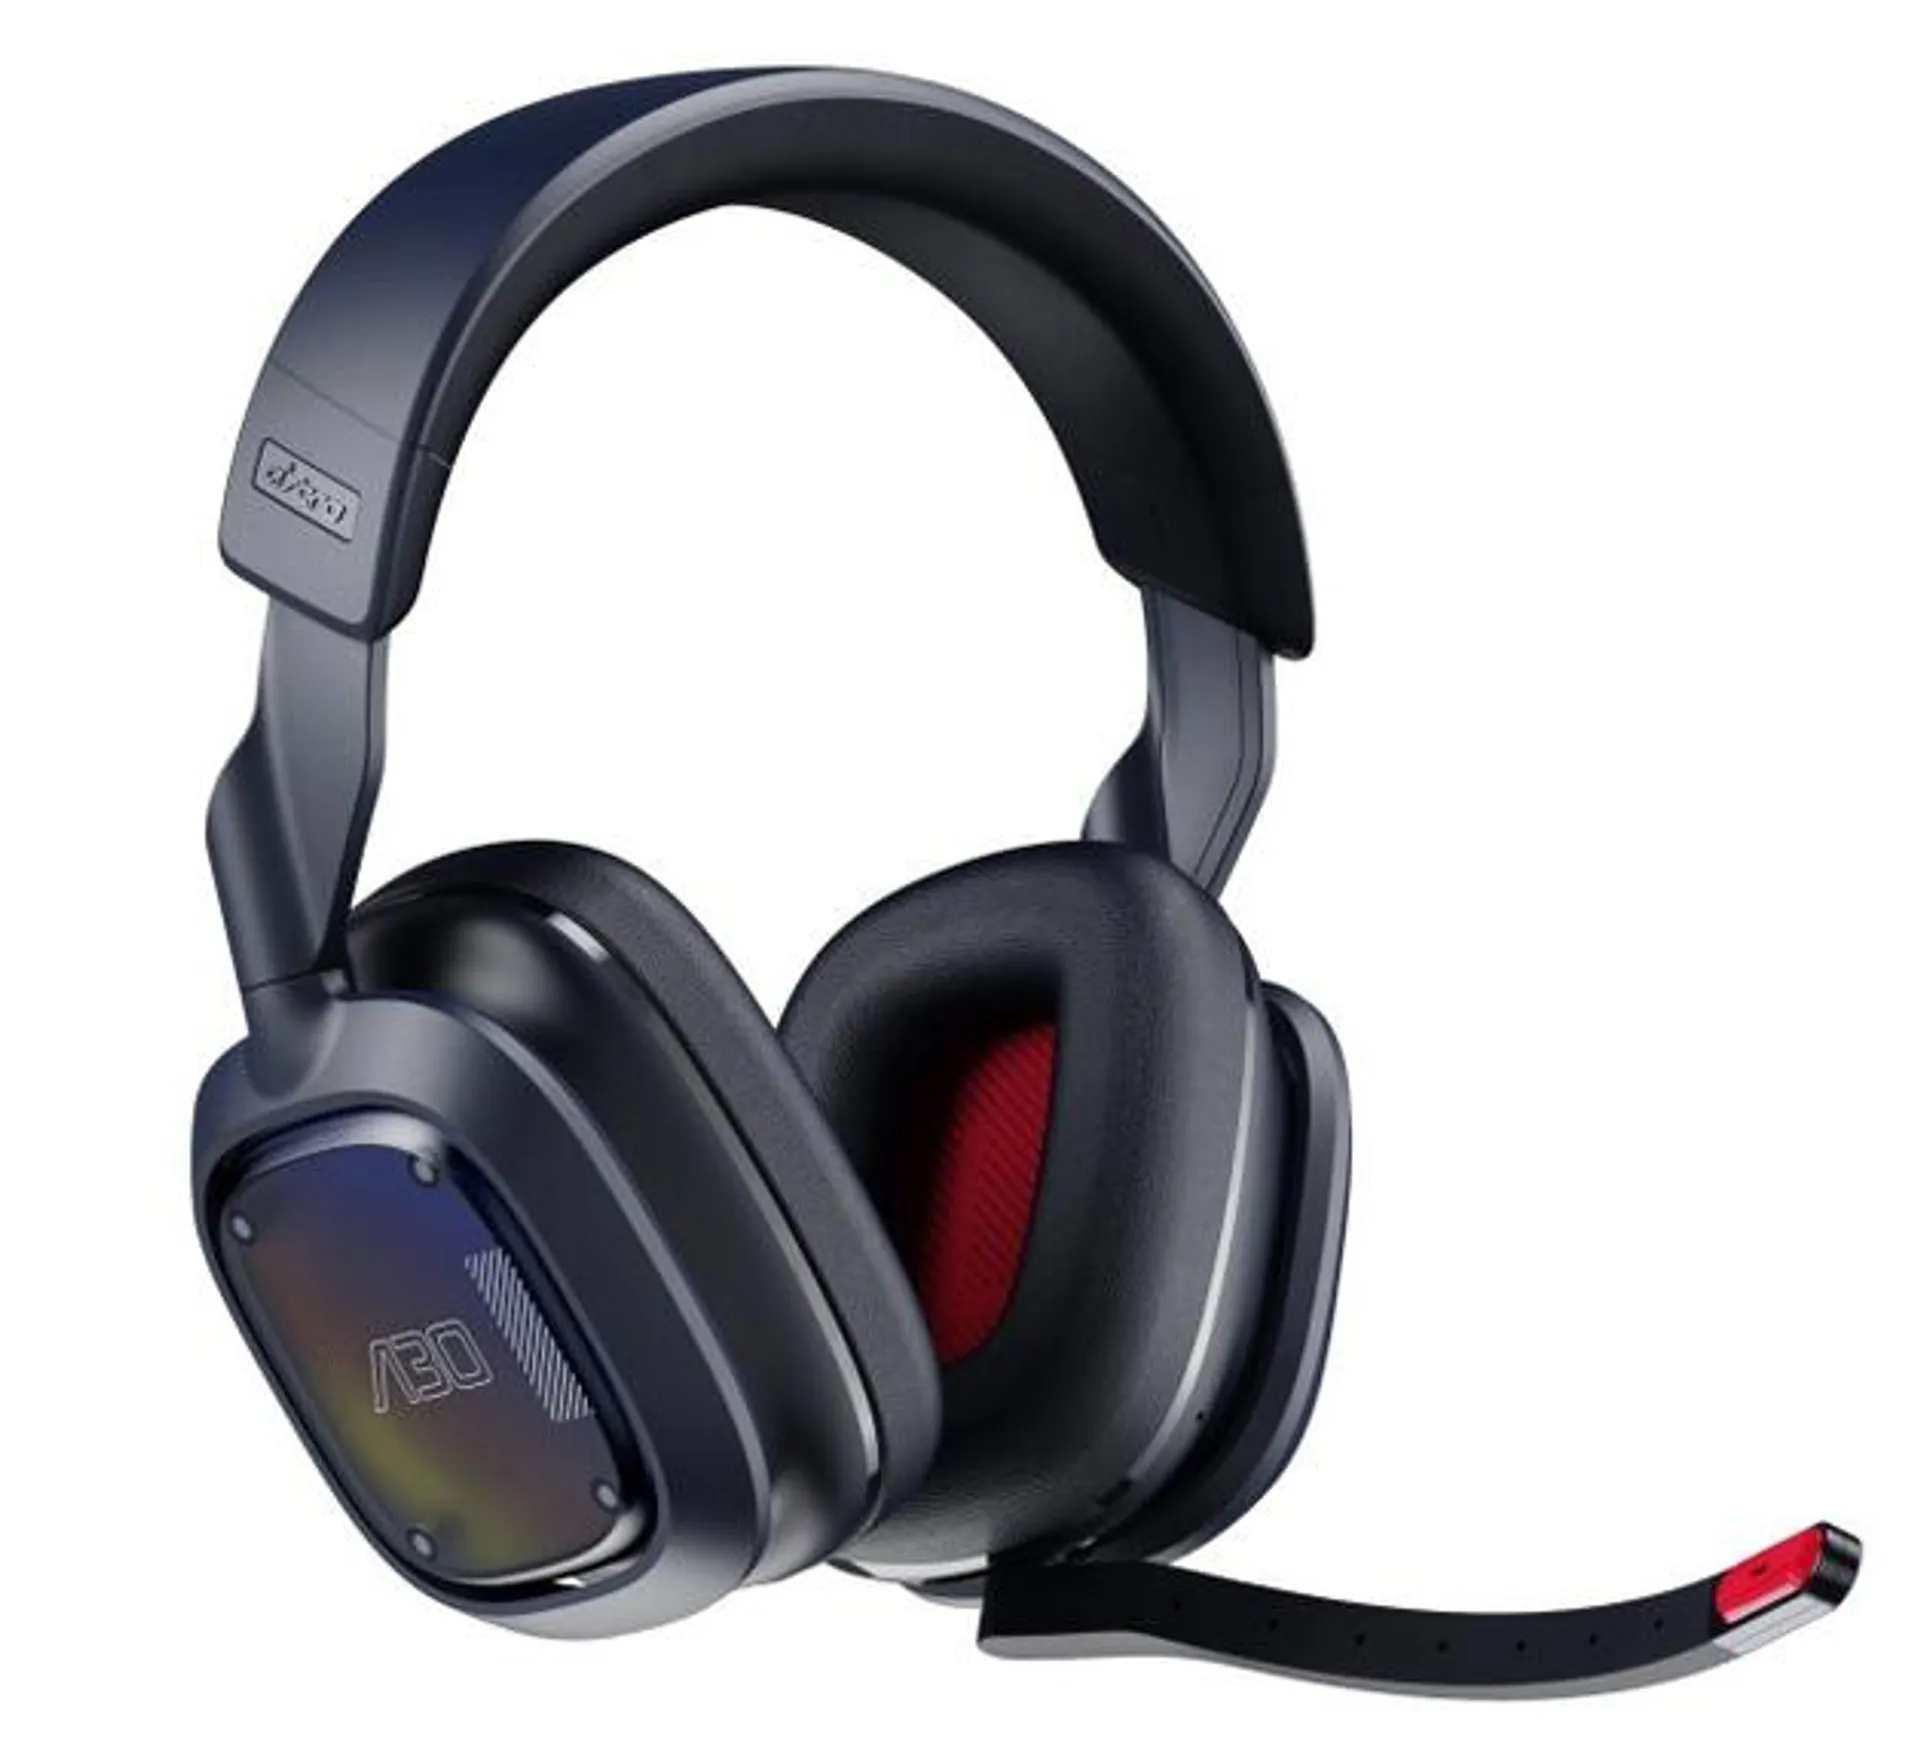 Astro A30 and Logitech G335 Gaming Headset BIG Boxing Day deal pricing for a limited time!